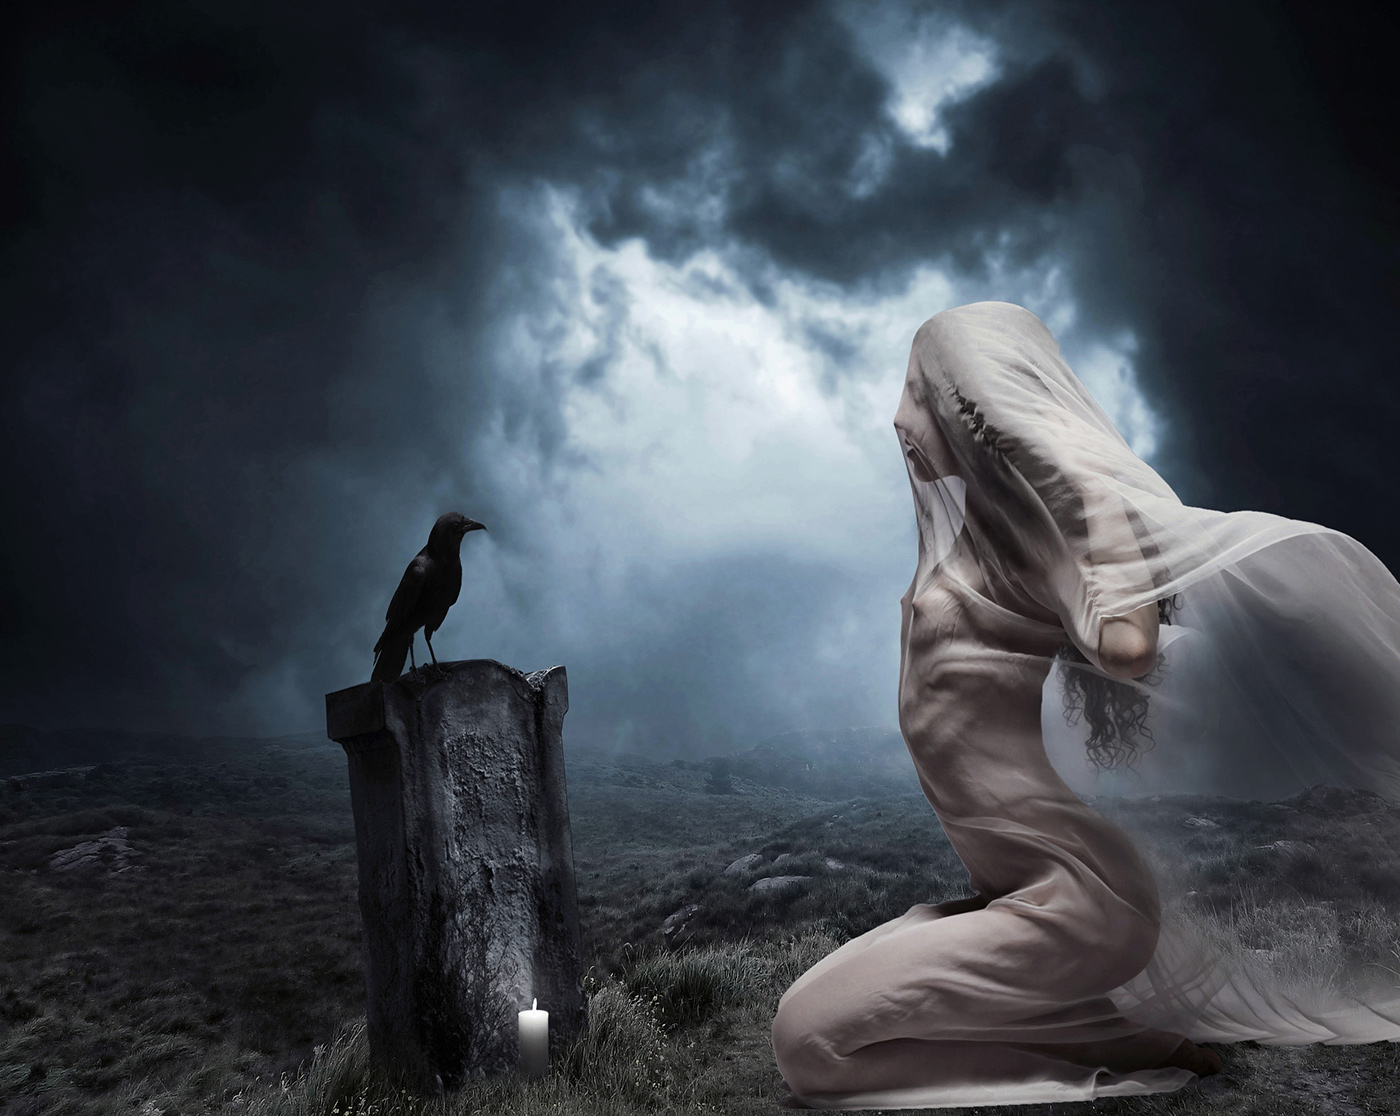 Surreal gothic digital artwork titled Lament. A nude woman, veiled in white, sits by an old grave in misty highlands. A raven perches on the gravestone. Evocative and captivating, blending beauty, solitude, and mystery. Perfect for lovers of surrealism and gothic aesthetics. veiled whispers, surreal gothic artwork, raven art print, fantasy nude, nude photo print, fantasy nude print, fairytale nude photo, conceptual nude art, fairytale nude print